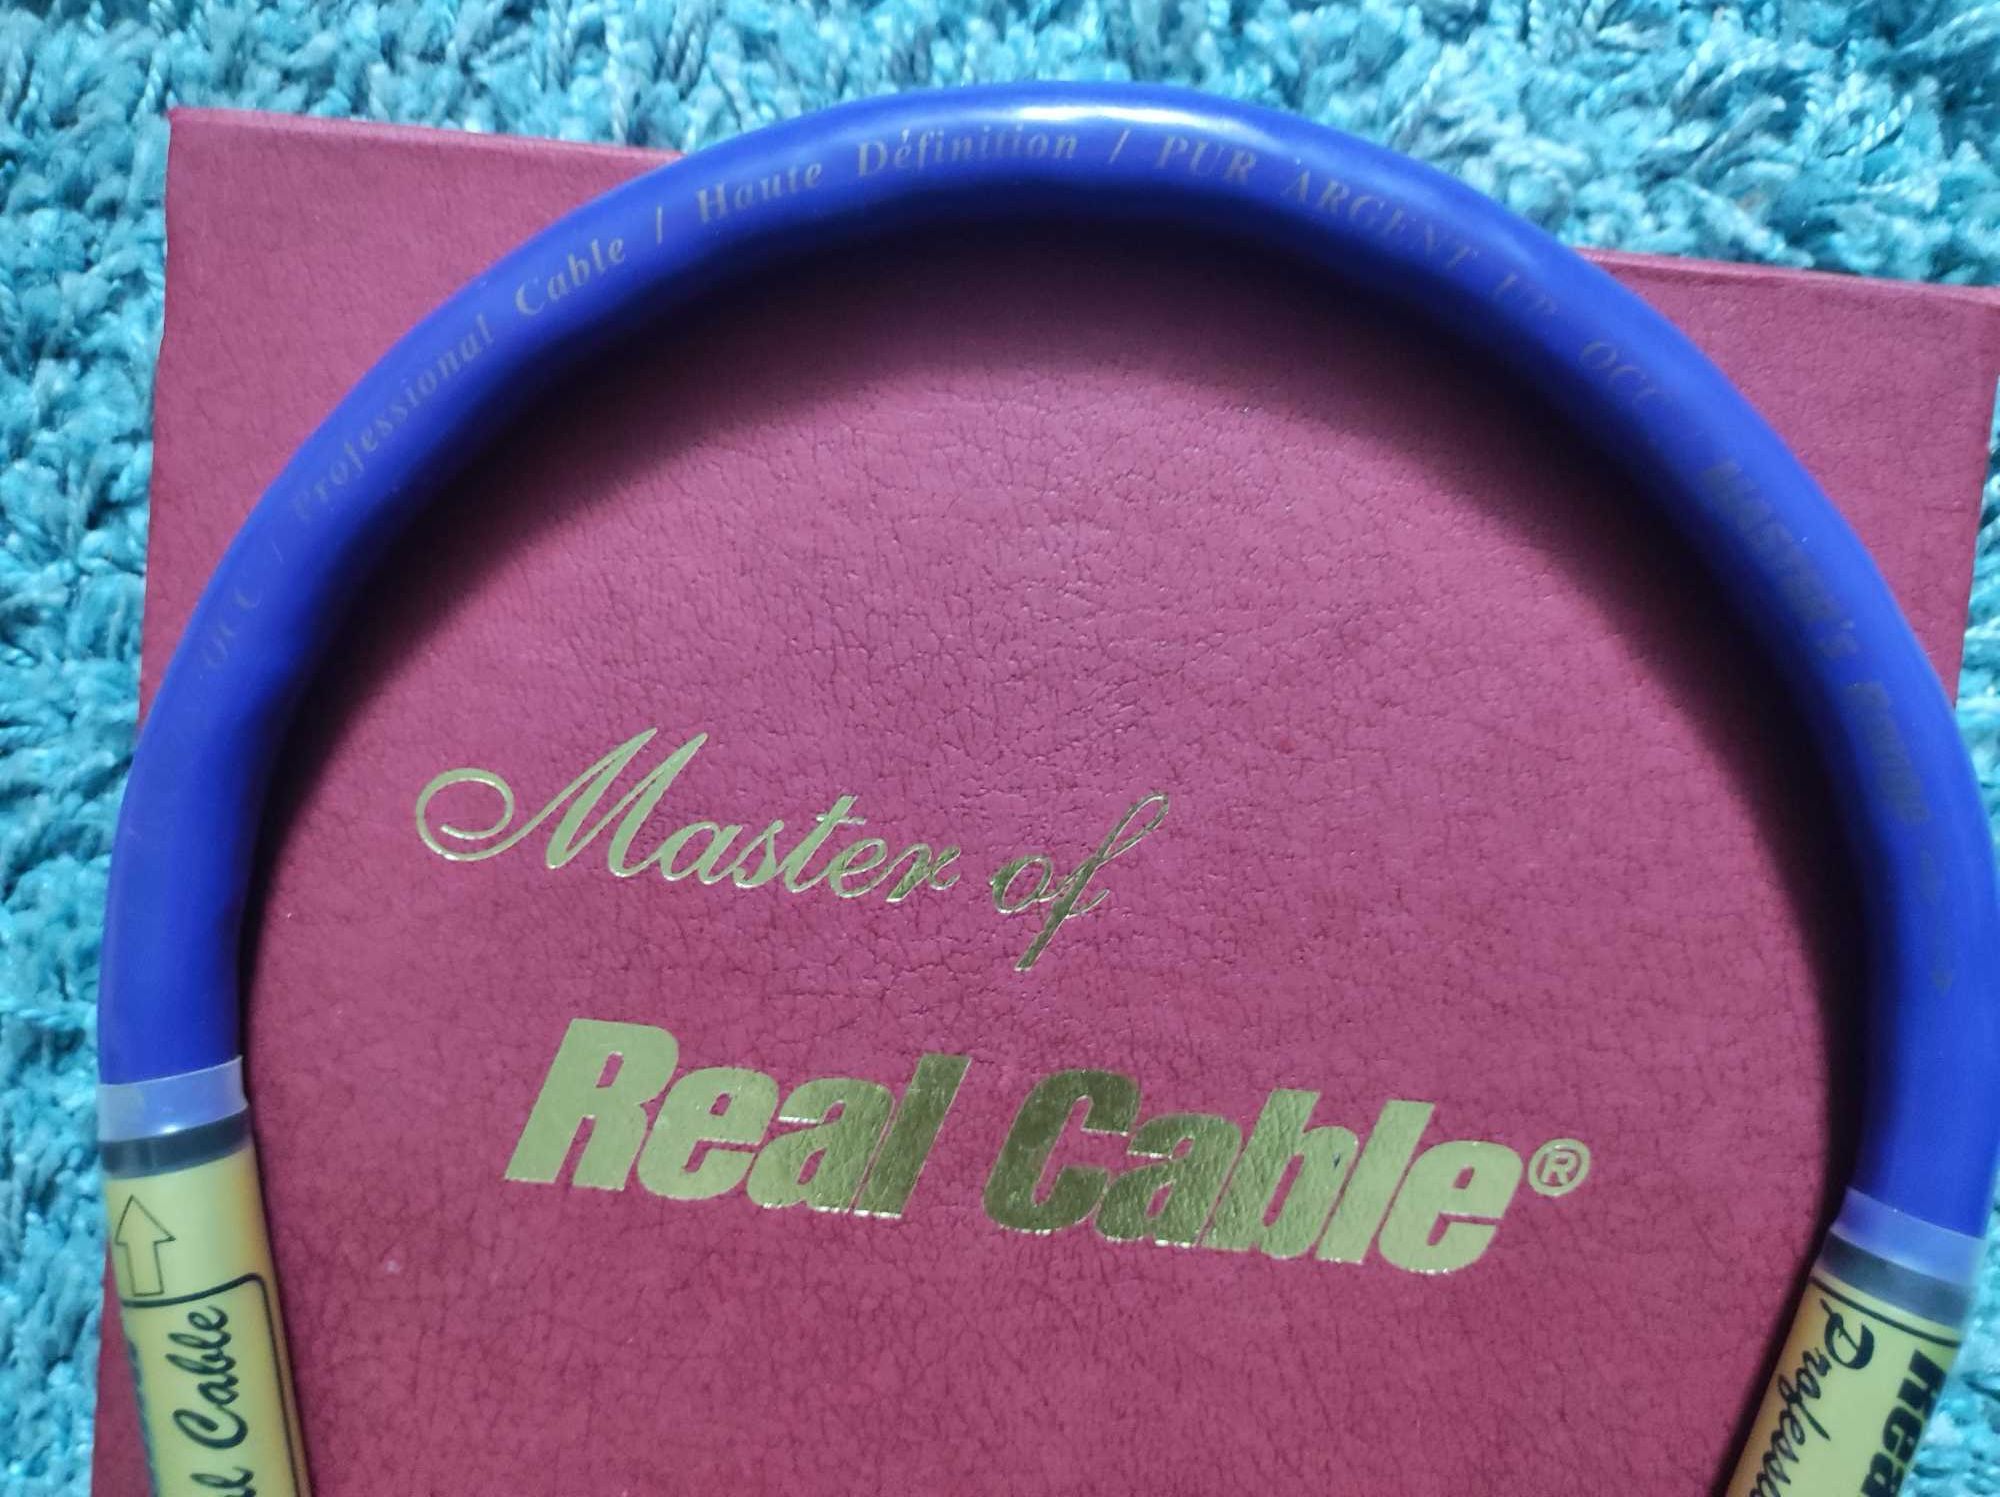 Real Cable Master of